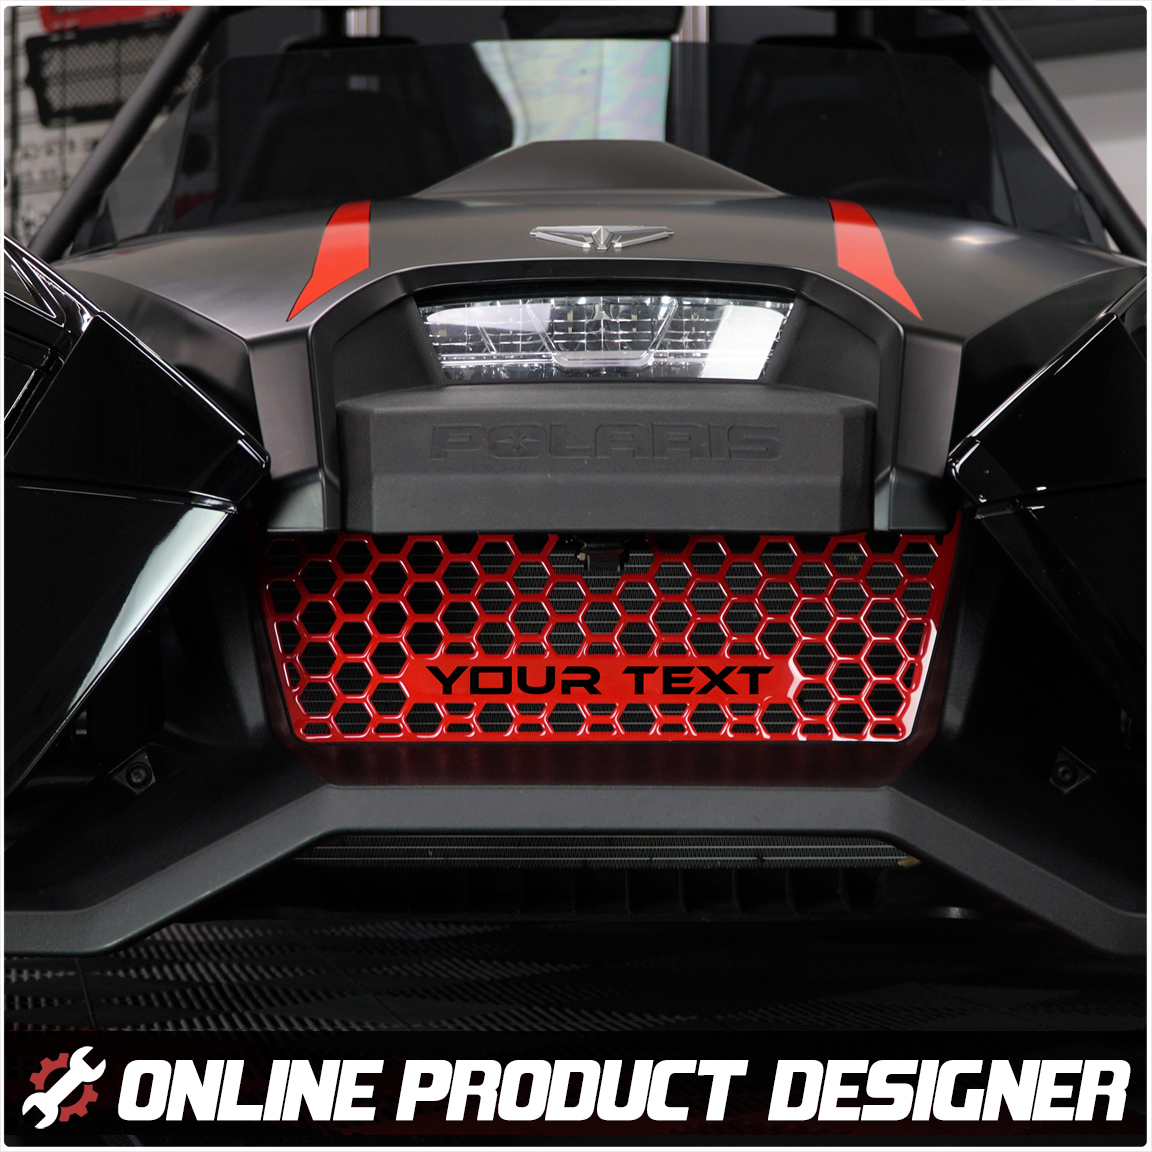 Personalized Front Grille with Customizable Color & Text Field for the Polaris Slingshot (2020+)